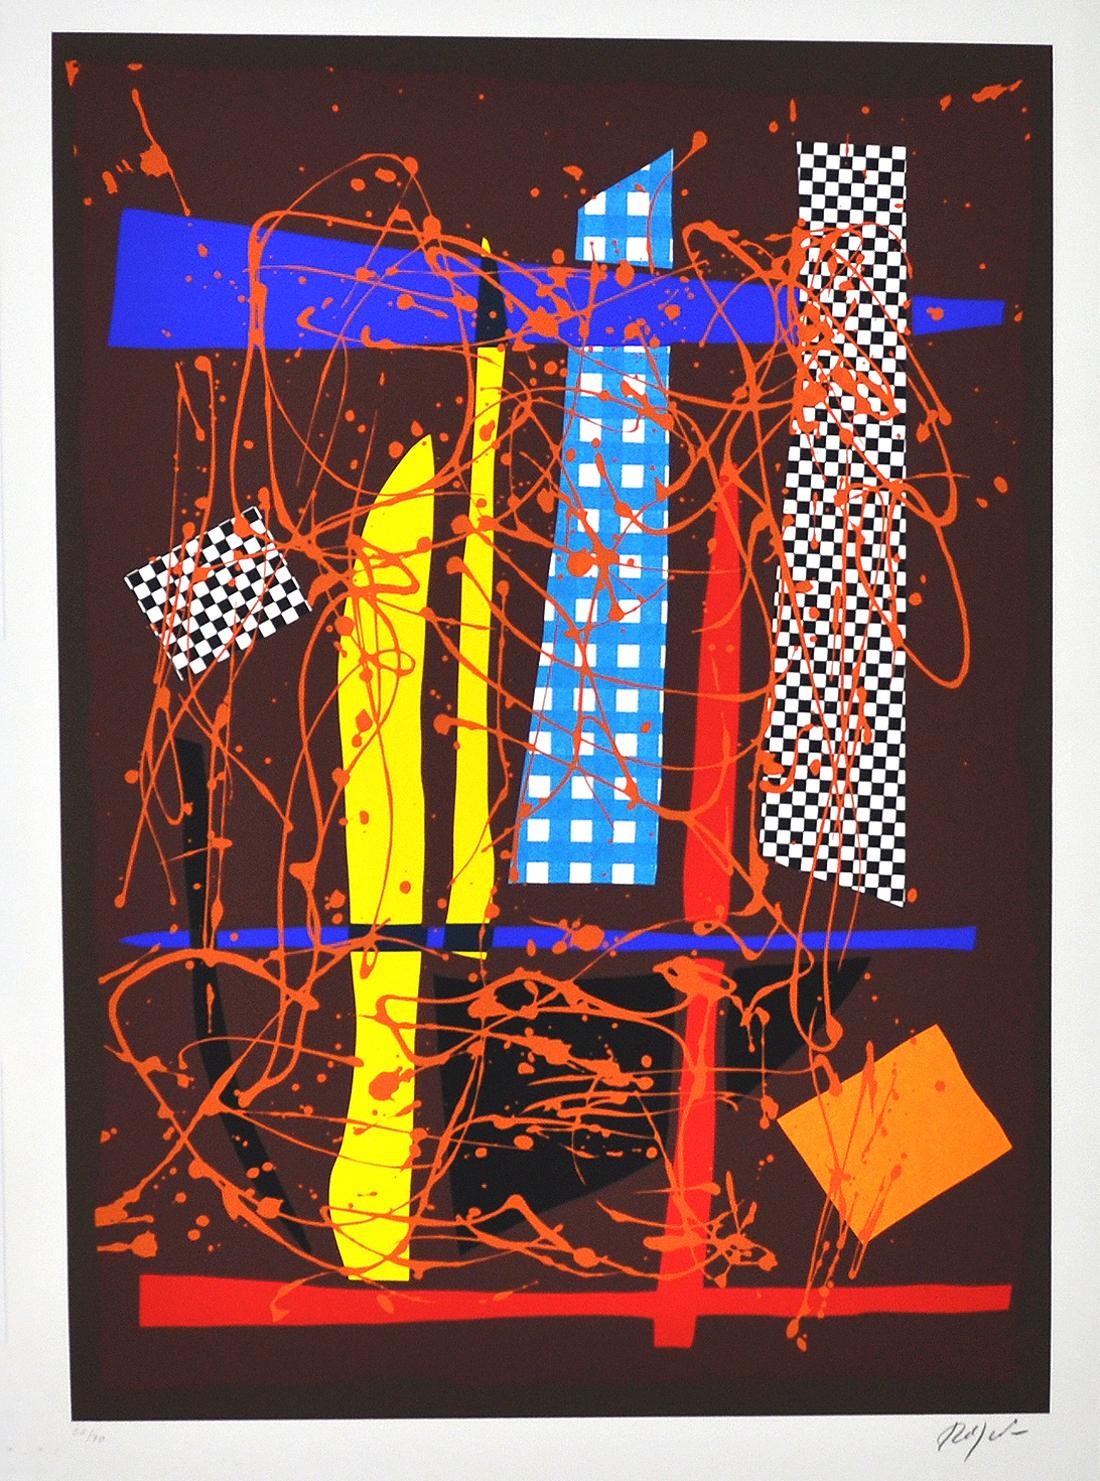 Screen Print by the Danish Artist Robert Jacobsen, Untitled, late 1980s
Numbered 32/70, signed.  84 cm H x 60 cm W, unframed.

Robert Jacobsen was a Danish artist who was self-taught as a sculptor and graphic artist and is represented in museums and